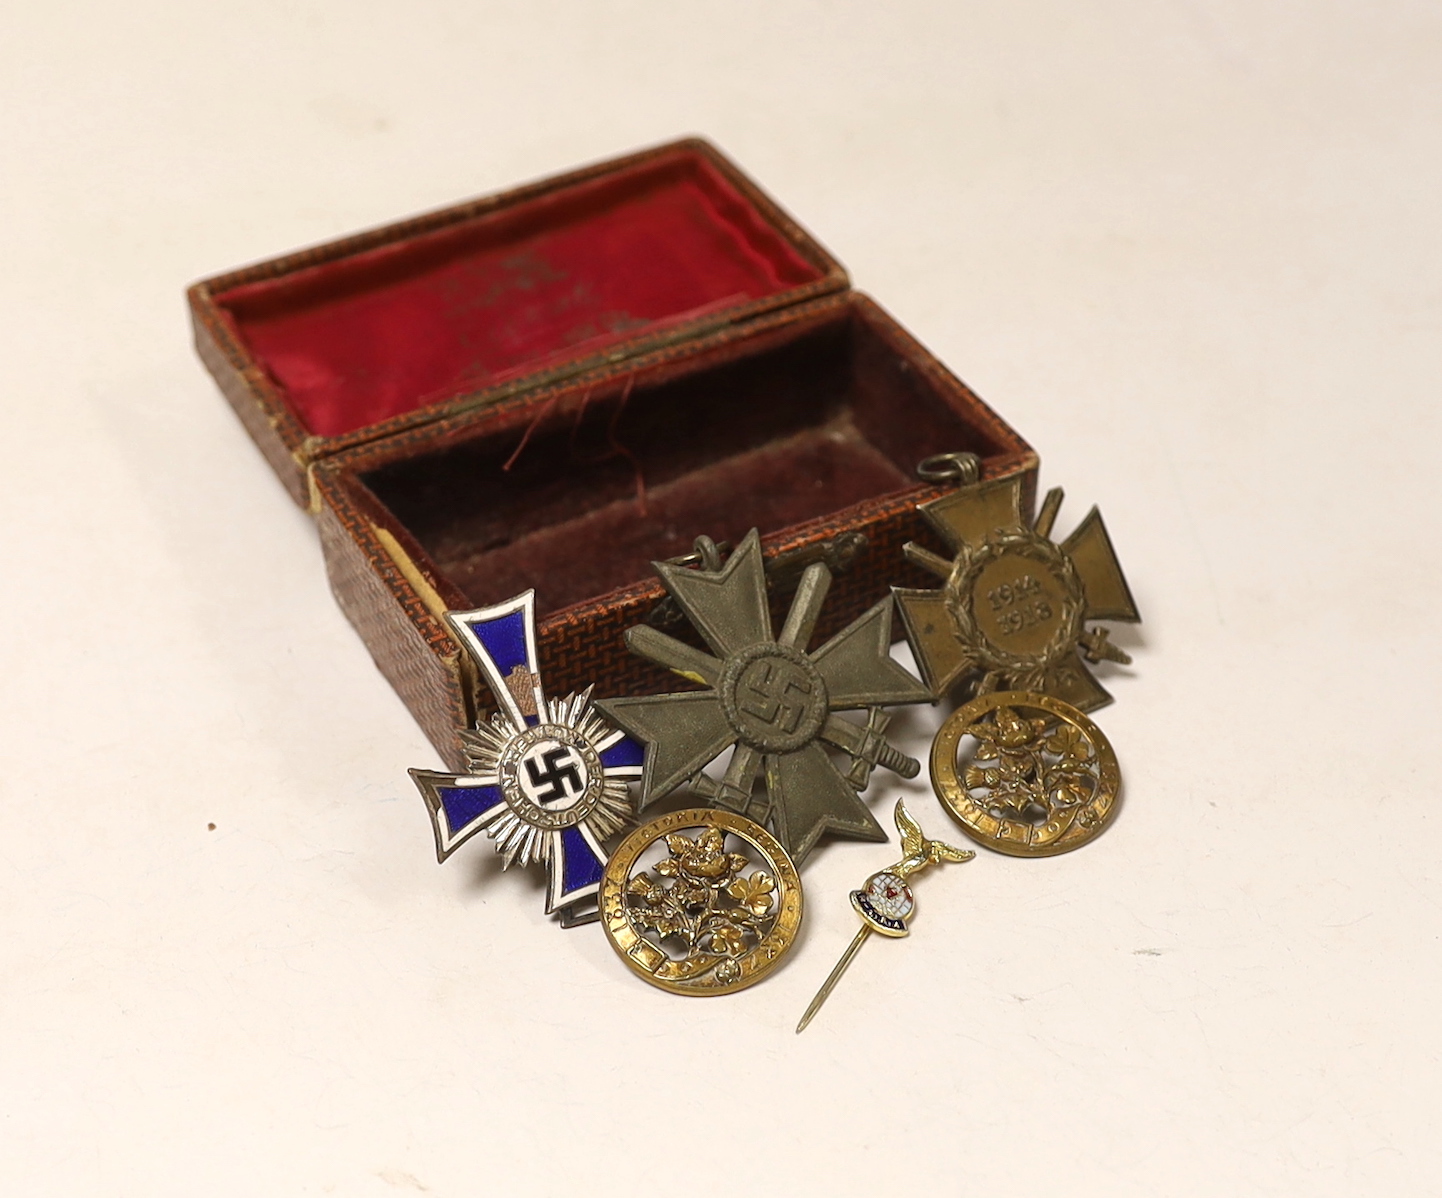 A WW1 Hindenburg Honour Cross A WW2 Silver German Mothers Cross showing some damage (for producing 6 or more children), a WW2 bronze Military War Merit Cross (with Swords) a small RAFA lapel badge, two gilt? badges comme